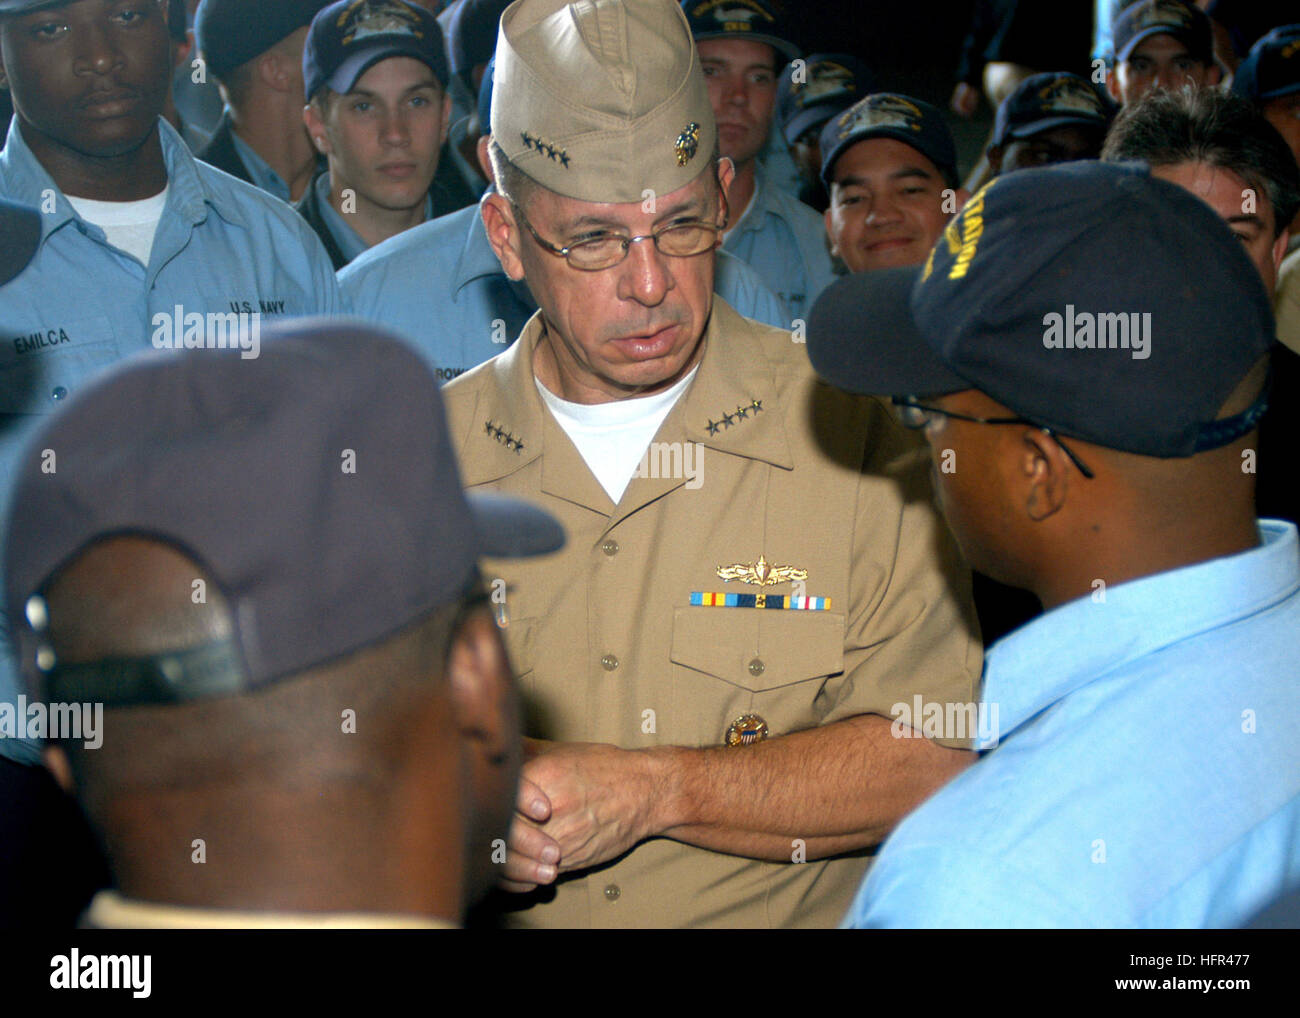 060329-N-7695R-003 Mayport, Fla. (March 29, 2006) - Chief of Naval Operations (CNO) Adm. Mike Mullen, visits with USS John F. Kennedy (CV 67) Sailors following an all-hands call in the carrierÕs hangar bay. Mullen visited Kennedy to keep the crew abreast of the ongoing debate over the storied carrierÕs future. U.S. Navy photo by PhotographerÕs Mate Airman Anthony Riddle (RELEASED) US Navy 060329-N-7695R-003 Chief of Naval Operations (CNO) Adm. Mike Mullen, visits with USS John F. Kennedy (CV 67) Sailors following an all-hands call in the carrier%%5Ersquo,s hangar bay Stock Photo